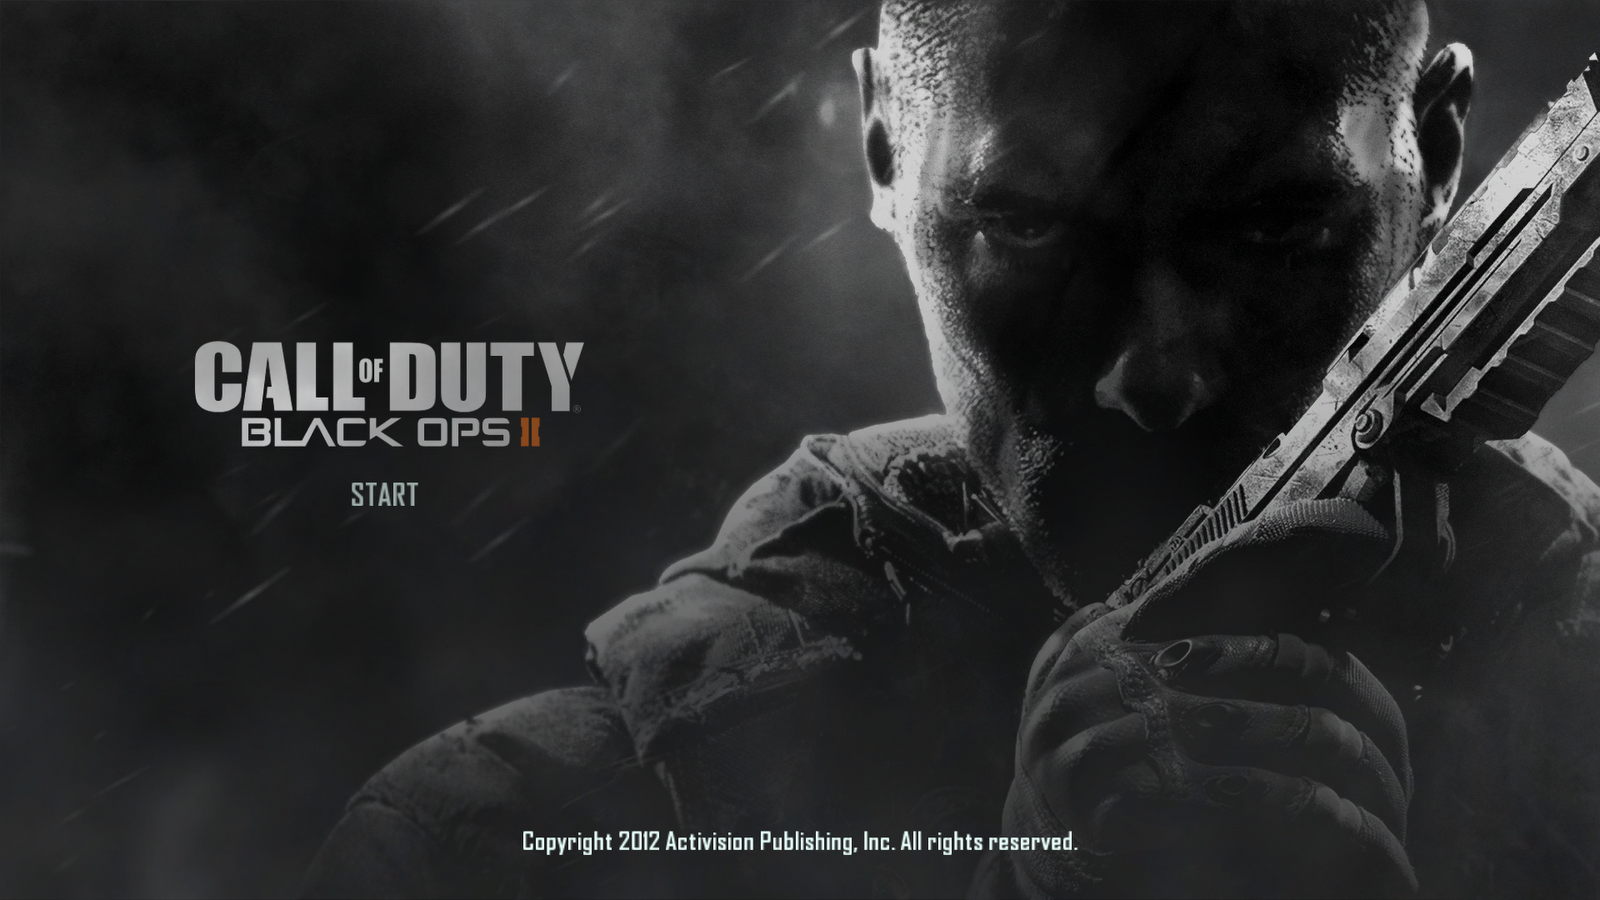 of duty black ops 2 2013 game high definition wallpapers